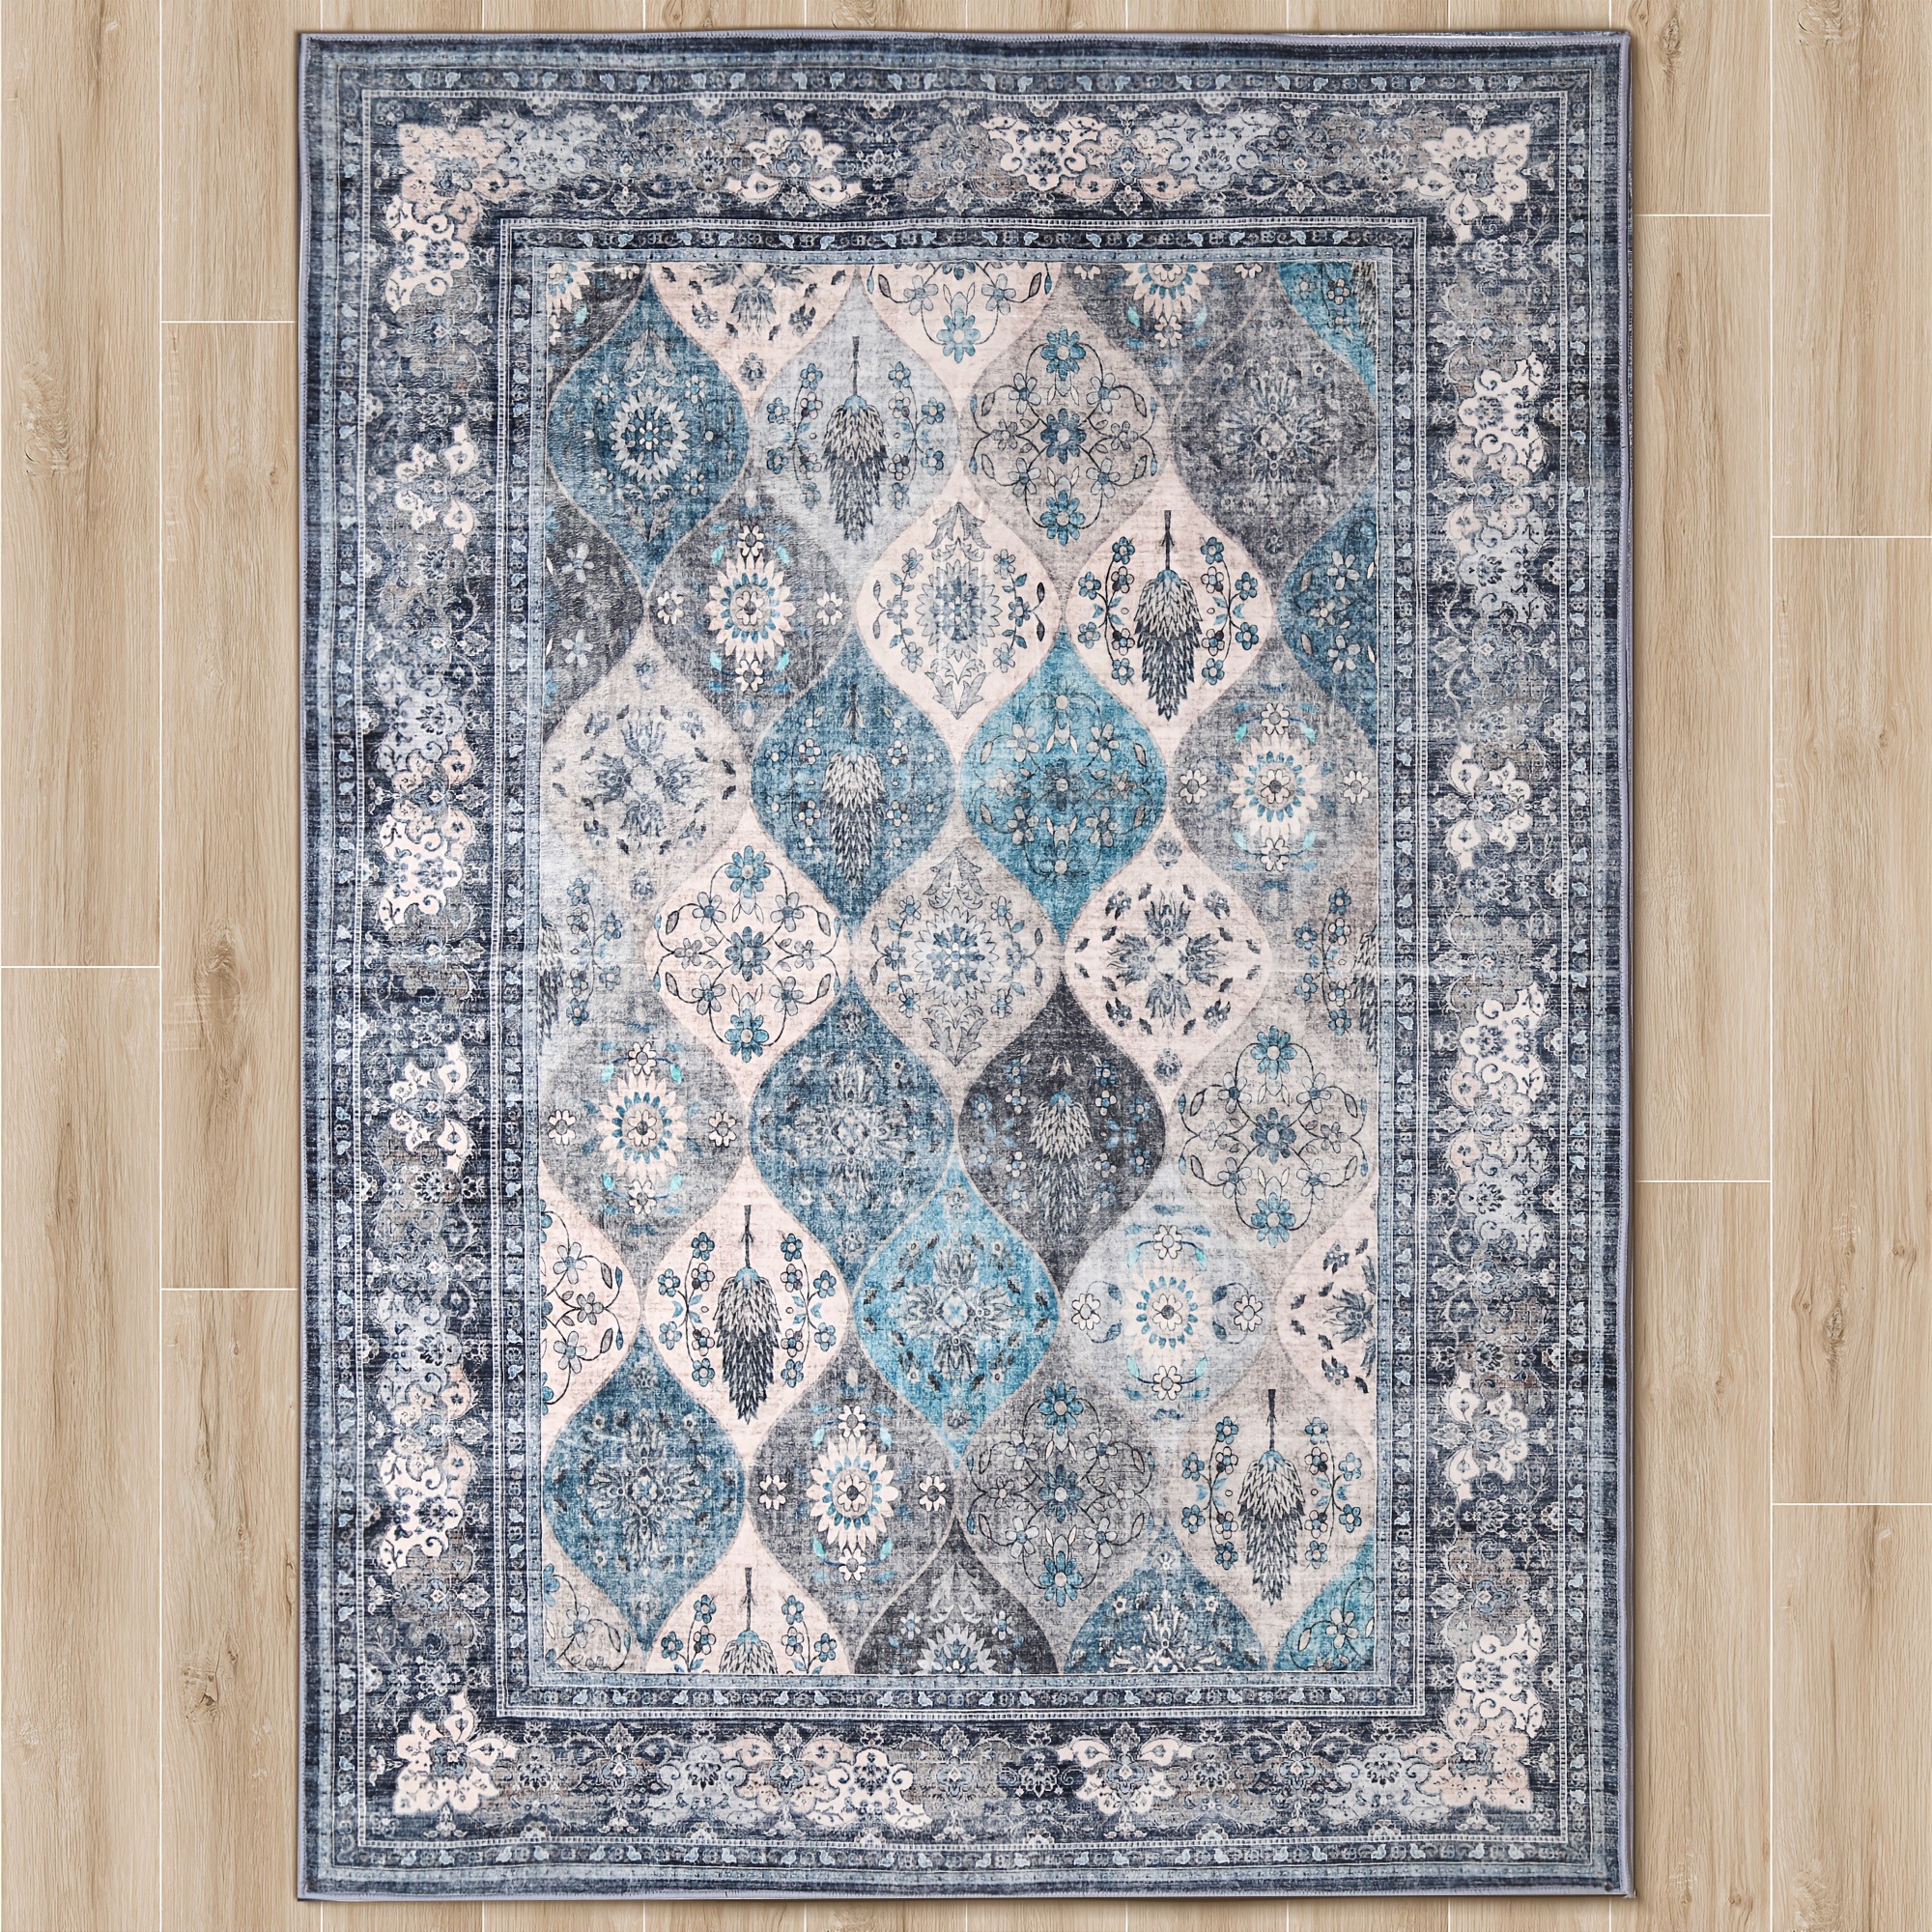 

1pc Boho Vintage Washable Tribal Area Rugs Low-pile Floral Print Carpet Mat Indoor Decor 5x7 Blue For Living Room Bedroom Farmhouse Dining Room